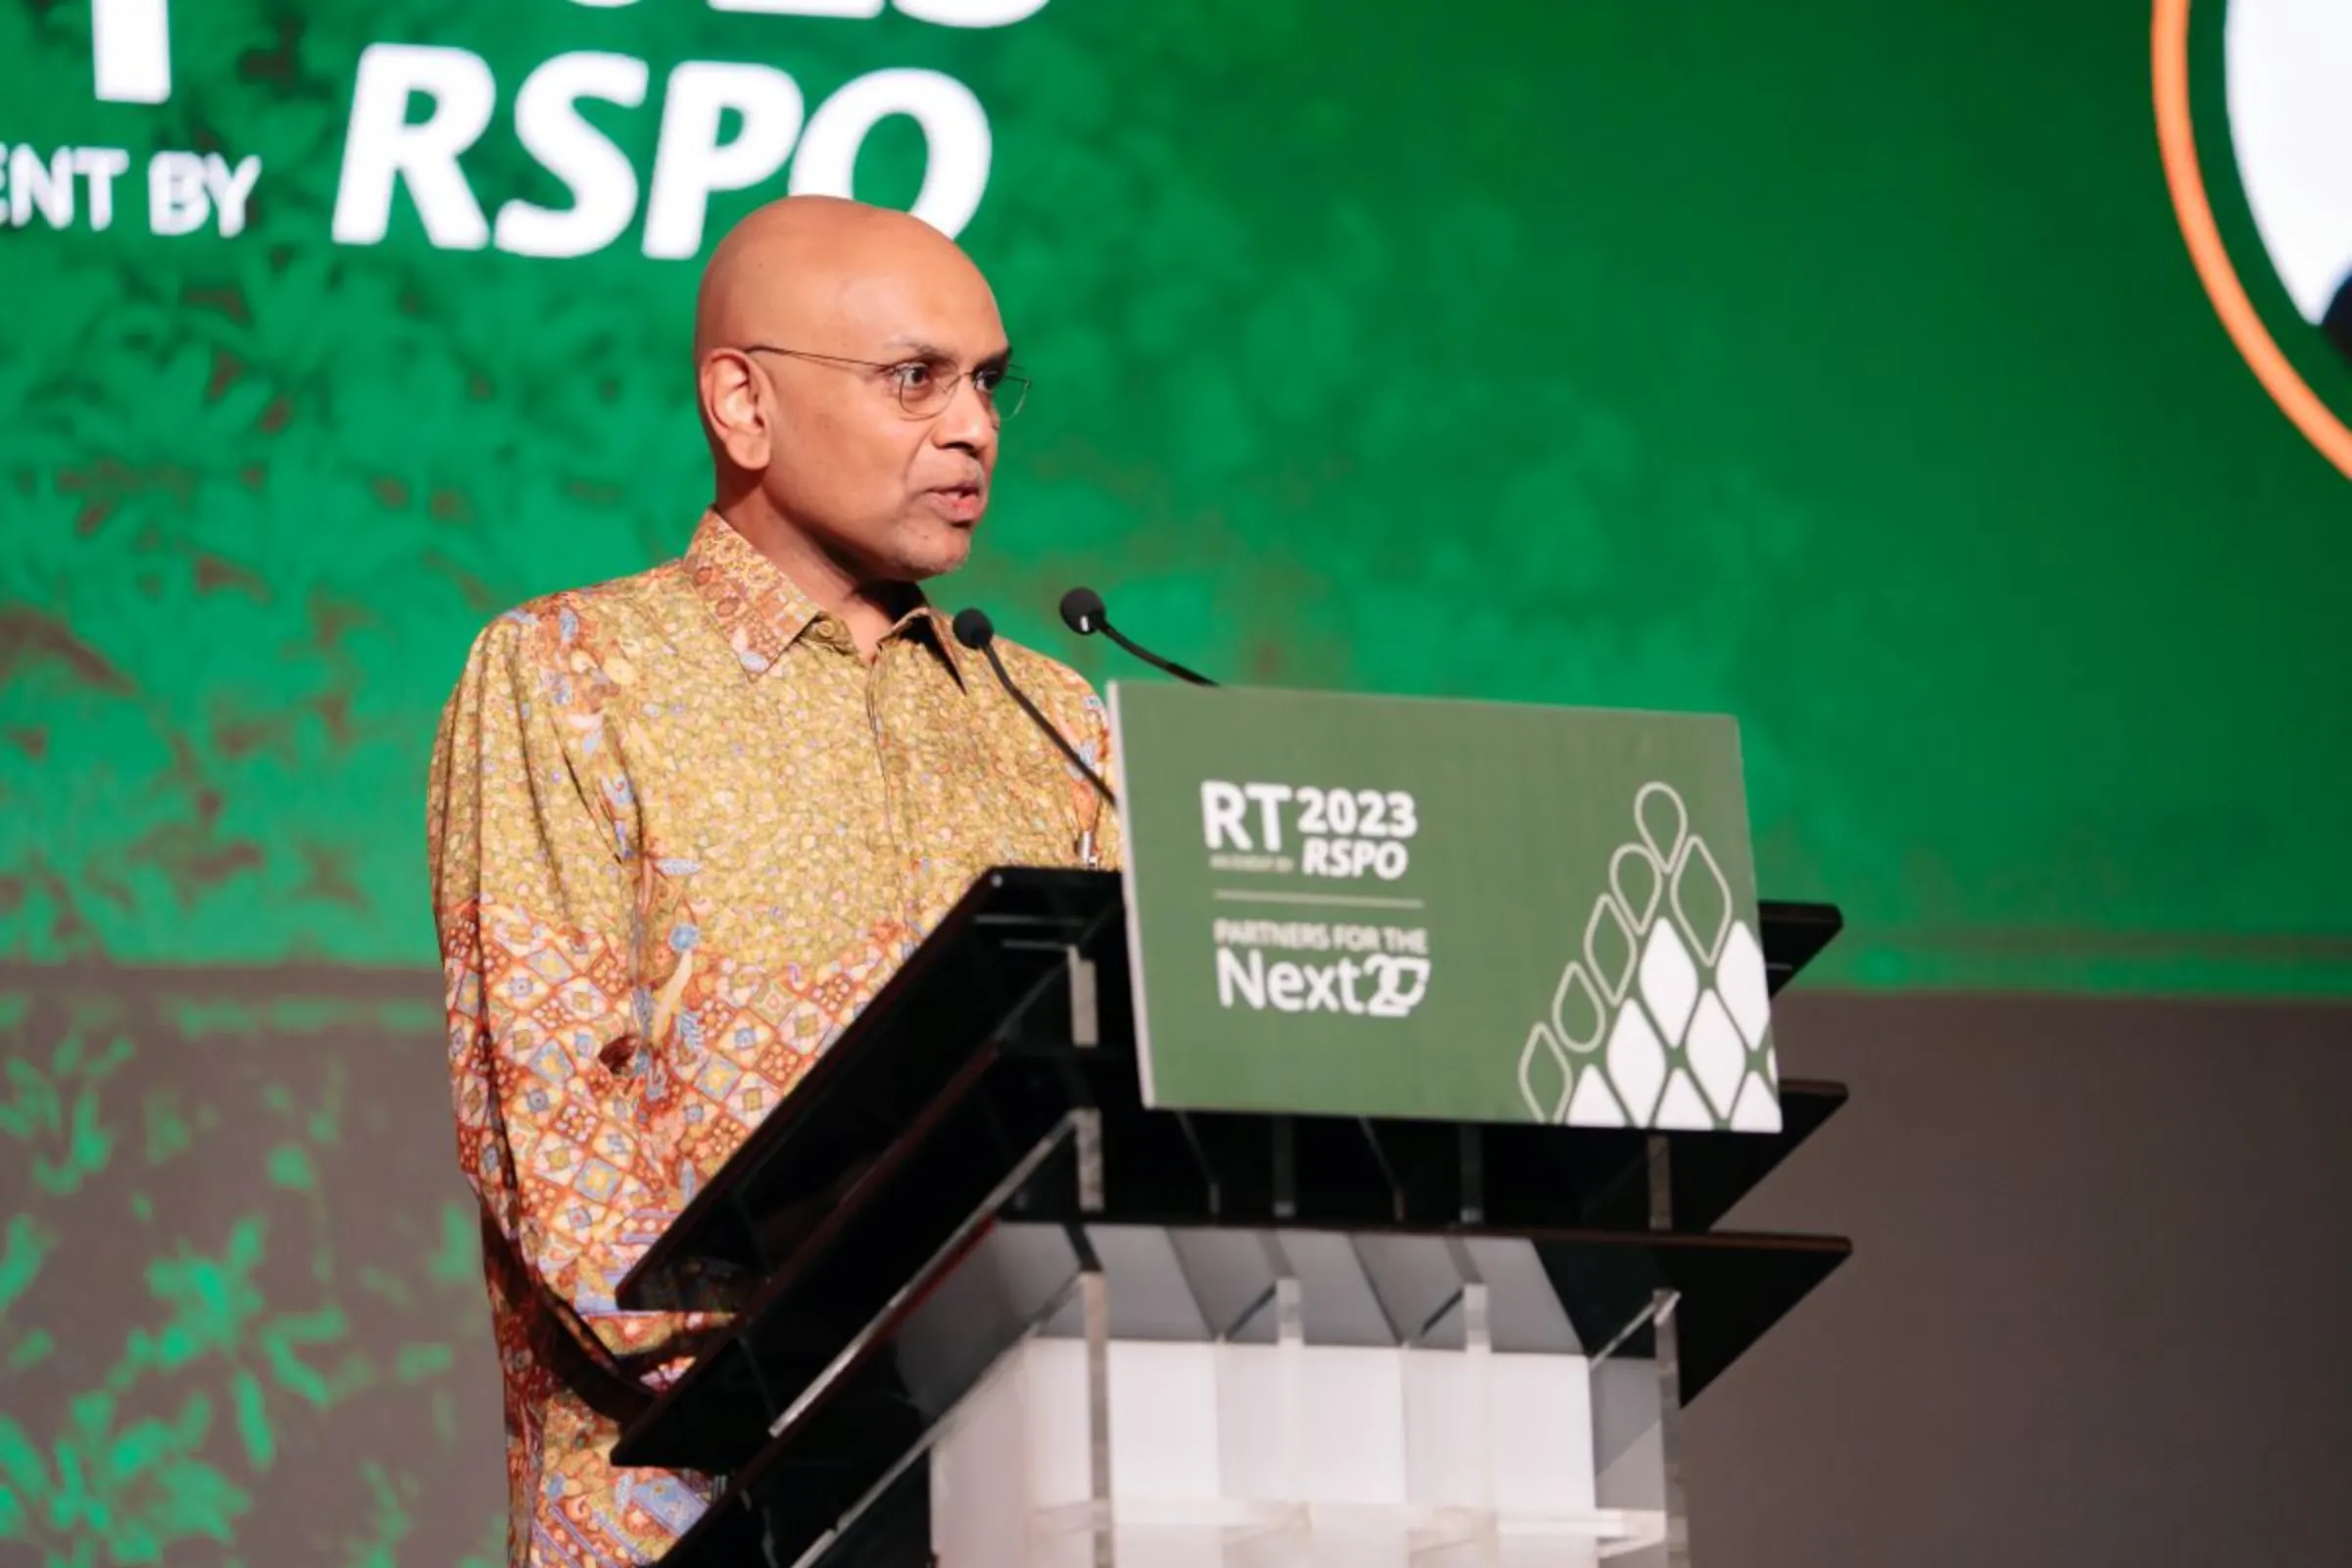 Joseph D’Cruz, the chief executive officer of the Roundtable on Sustainable Palm Oil speaks at the industry watchdog's conference in Jakarta, Indonesia, November 20, 2023